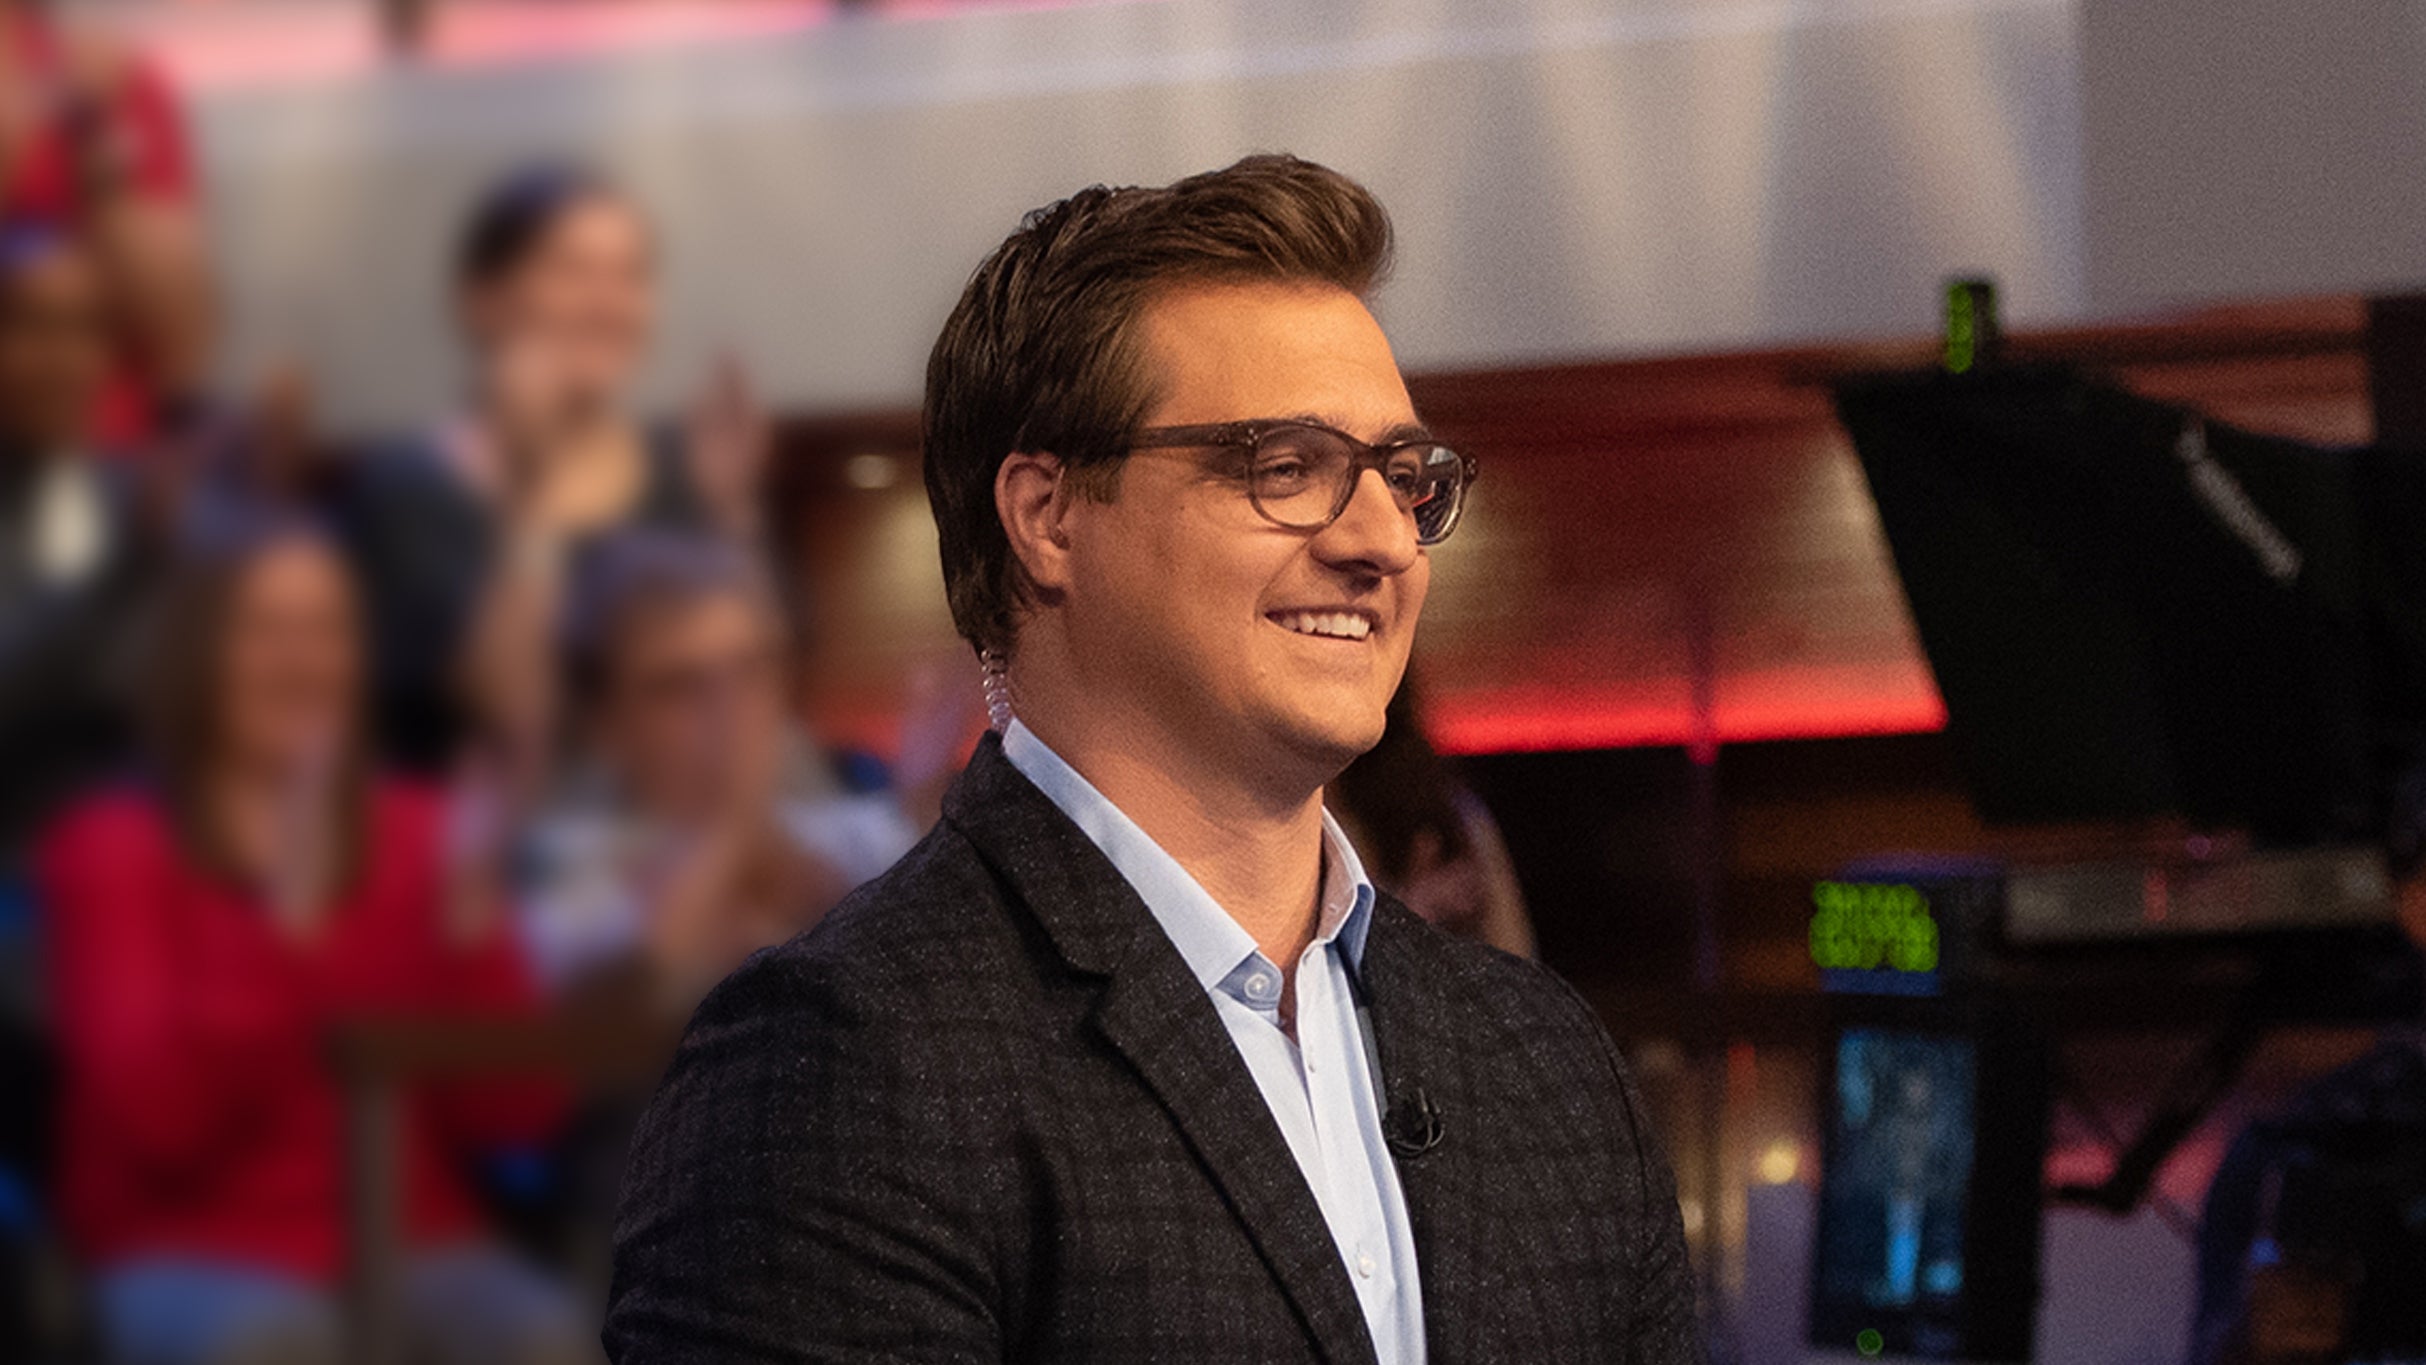 Why Is This Happening? The Chris Hayes Podcast 2023 Live Tour free pre-sale code for early tickets in New York